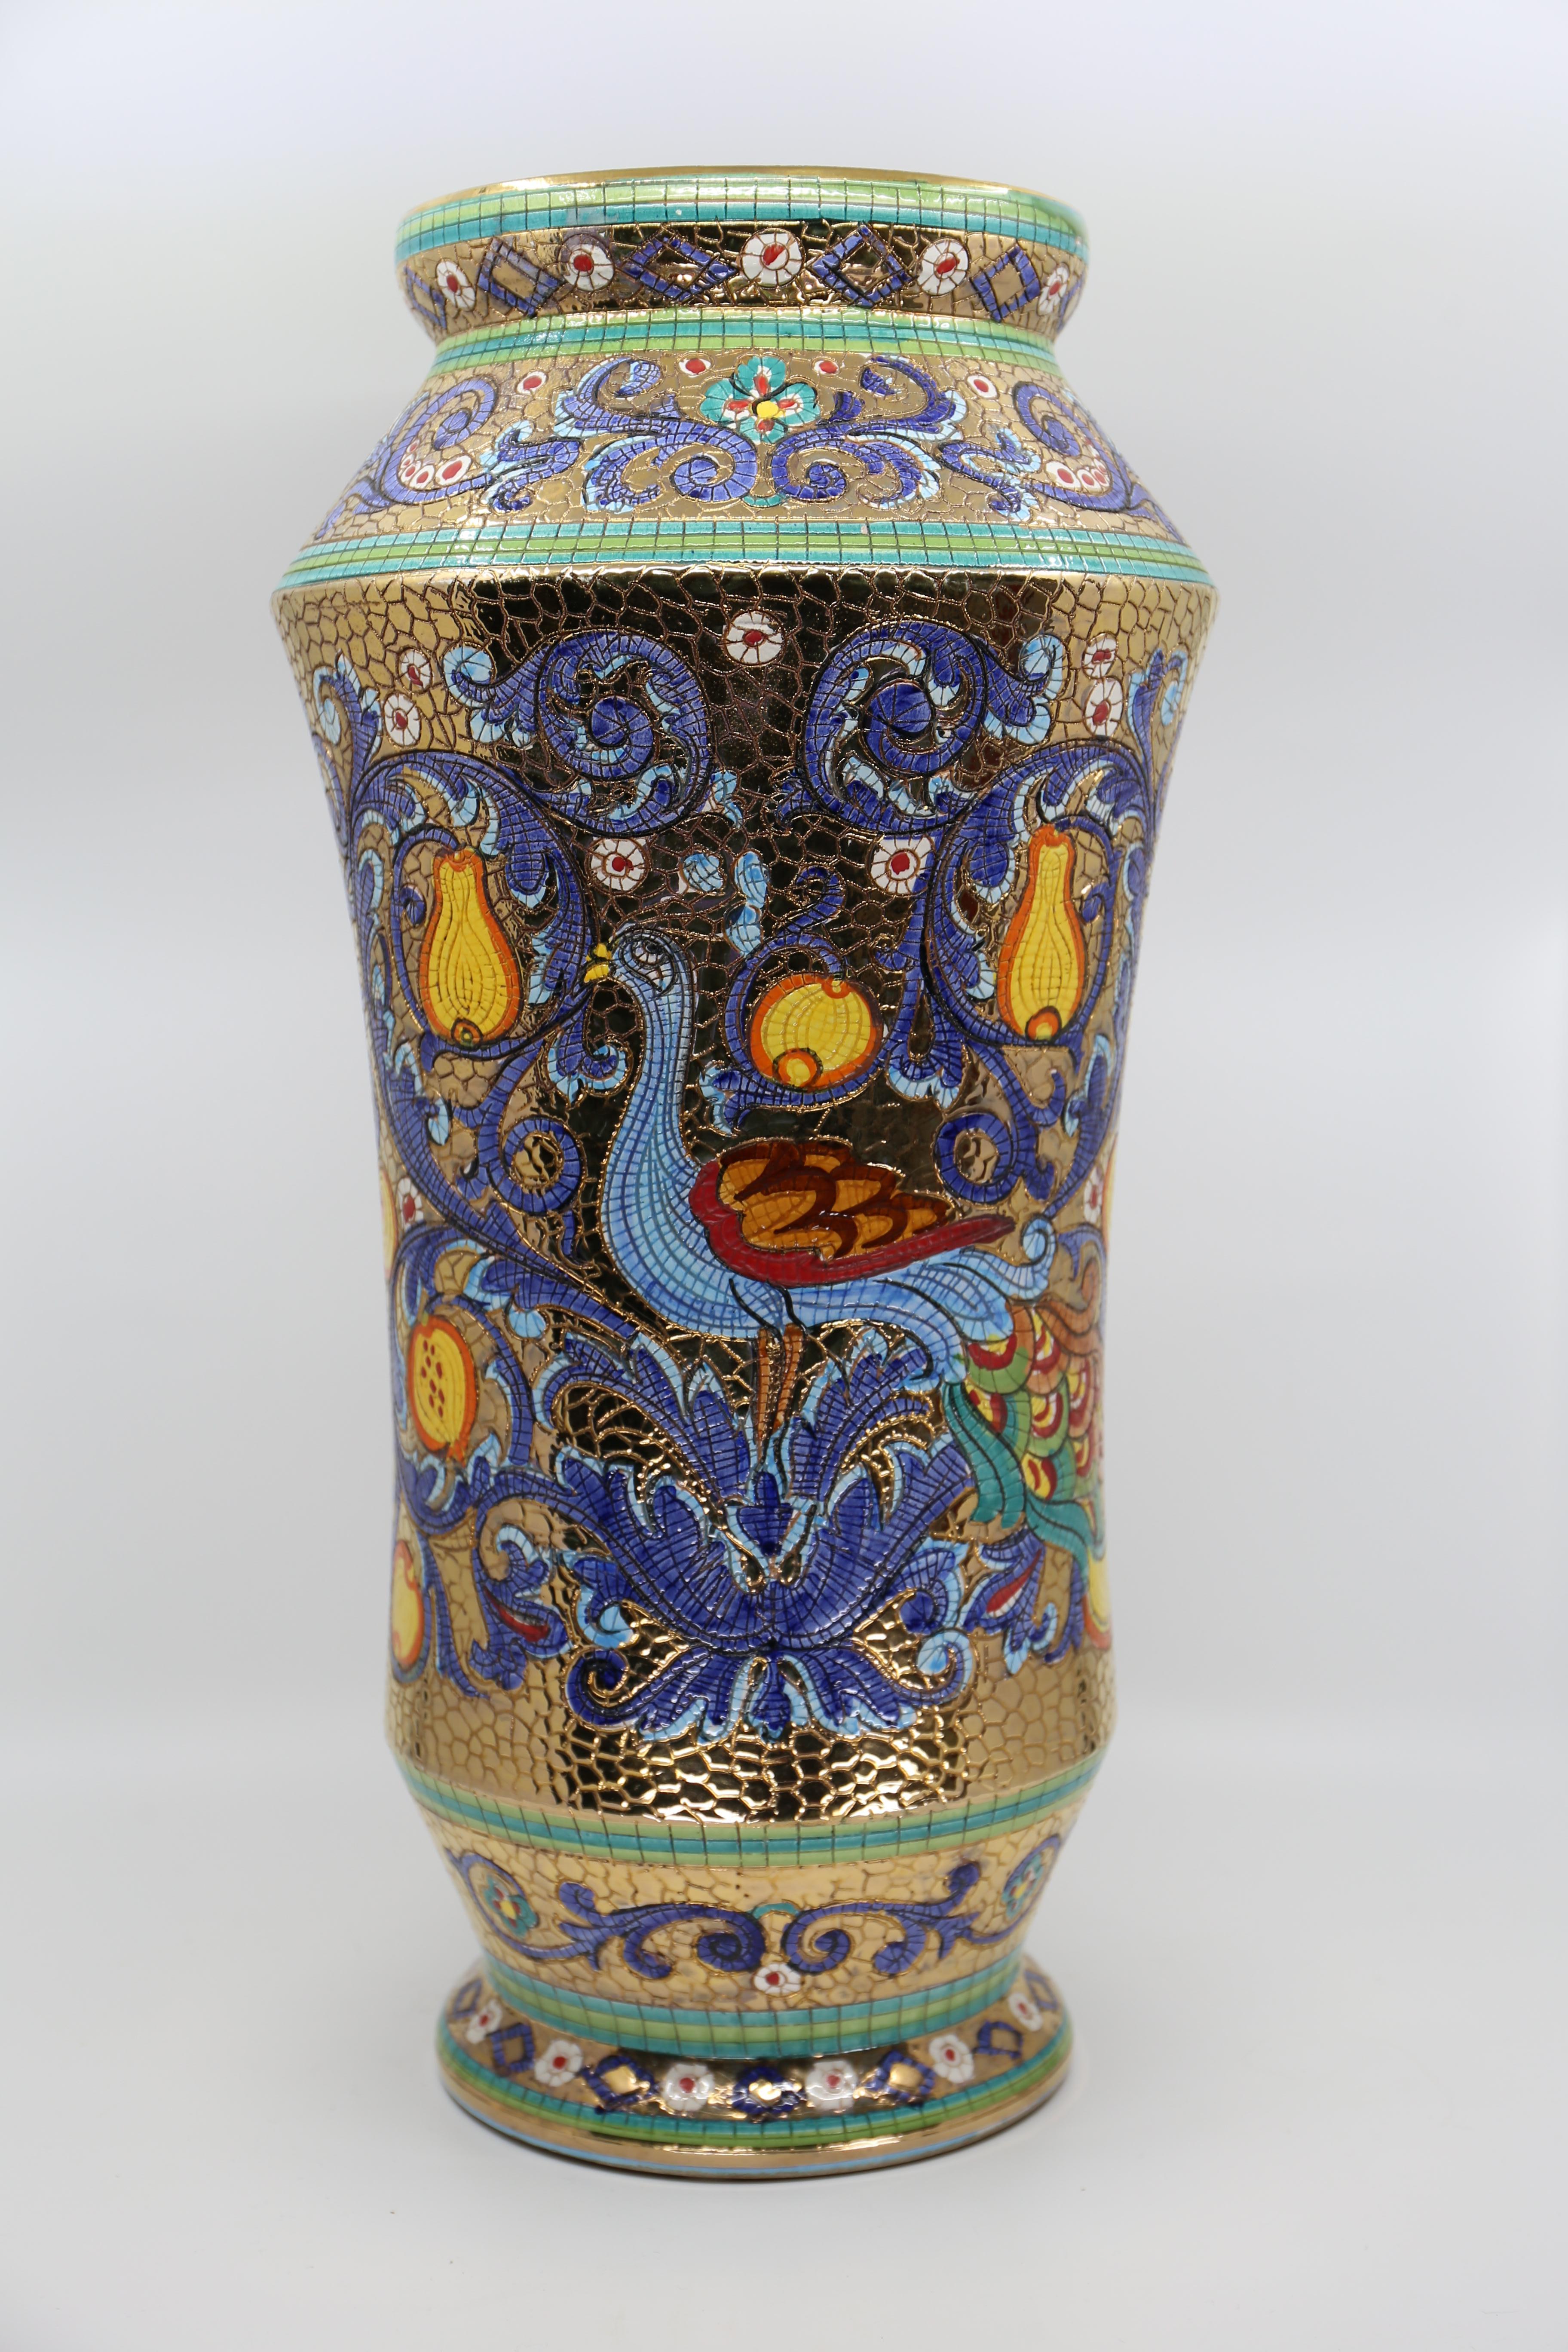 Large Majolica mosaic vase, hand decorated with pure gold leaf.

Italian Vintage Deruta Mosaic Vase, design is a depiction of Empress Theodora, sixth century Byzantine wife of Emperor Justinian, later canonized by the Eastern Orthodox Church as